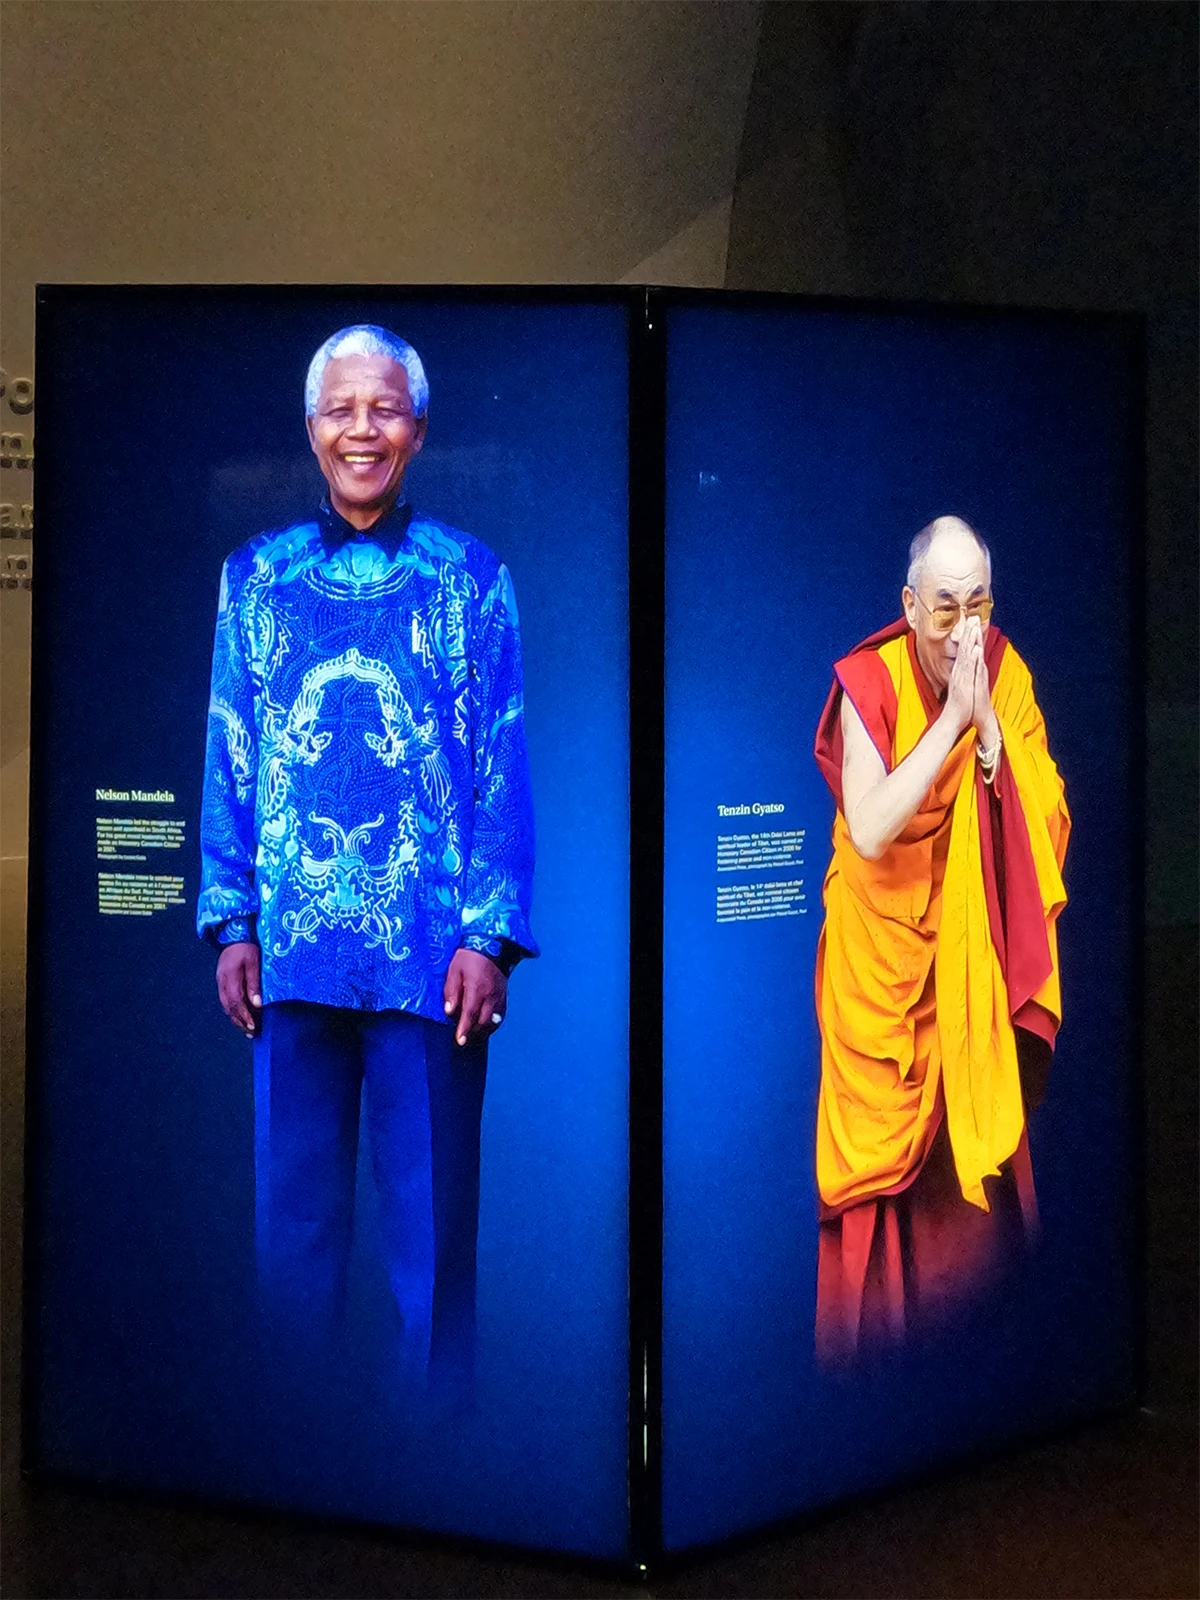 electric screens at Canadian Museum for Human rights with photos of Nelson Mandela and Tenzin Gyatso